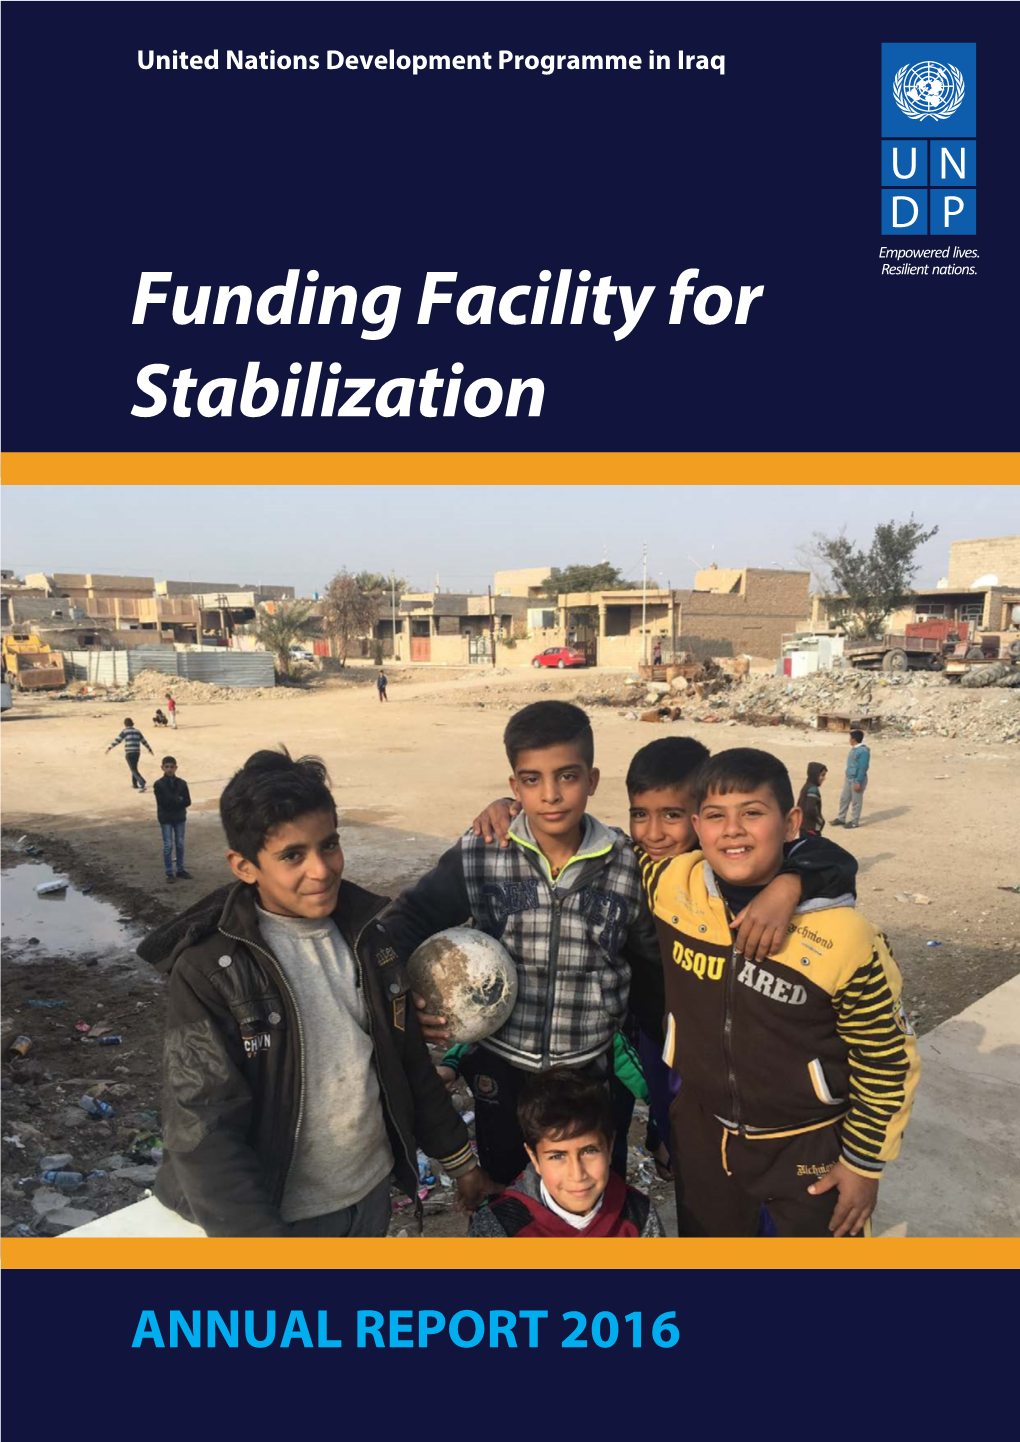 Funding Facility for Stabilization